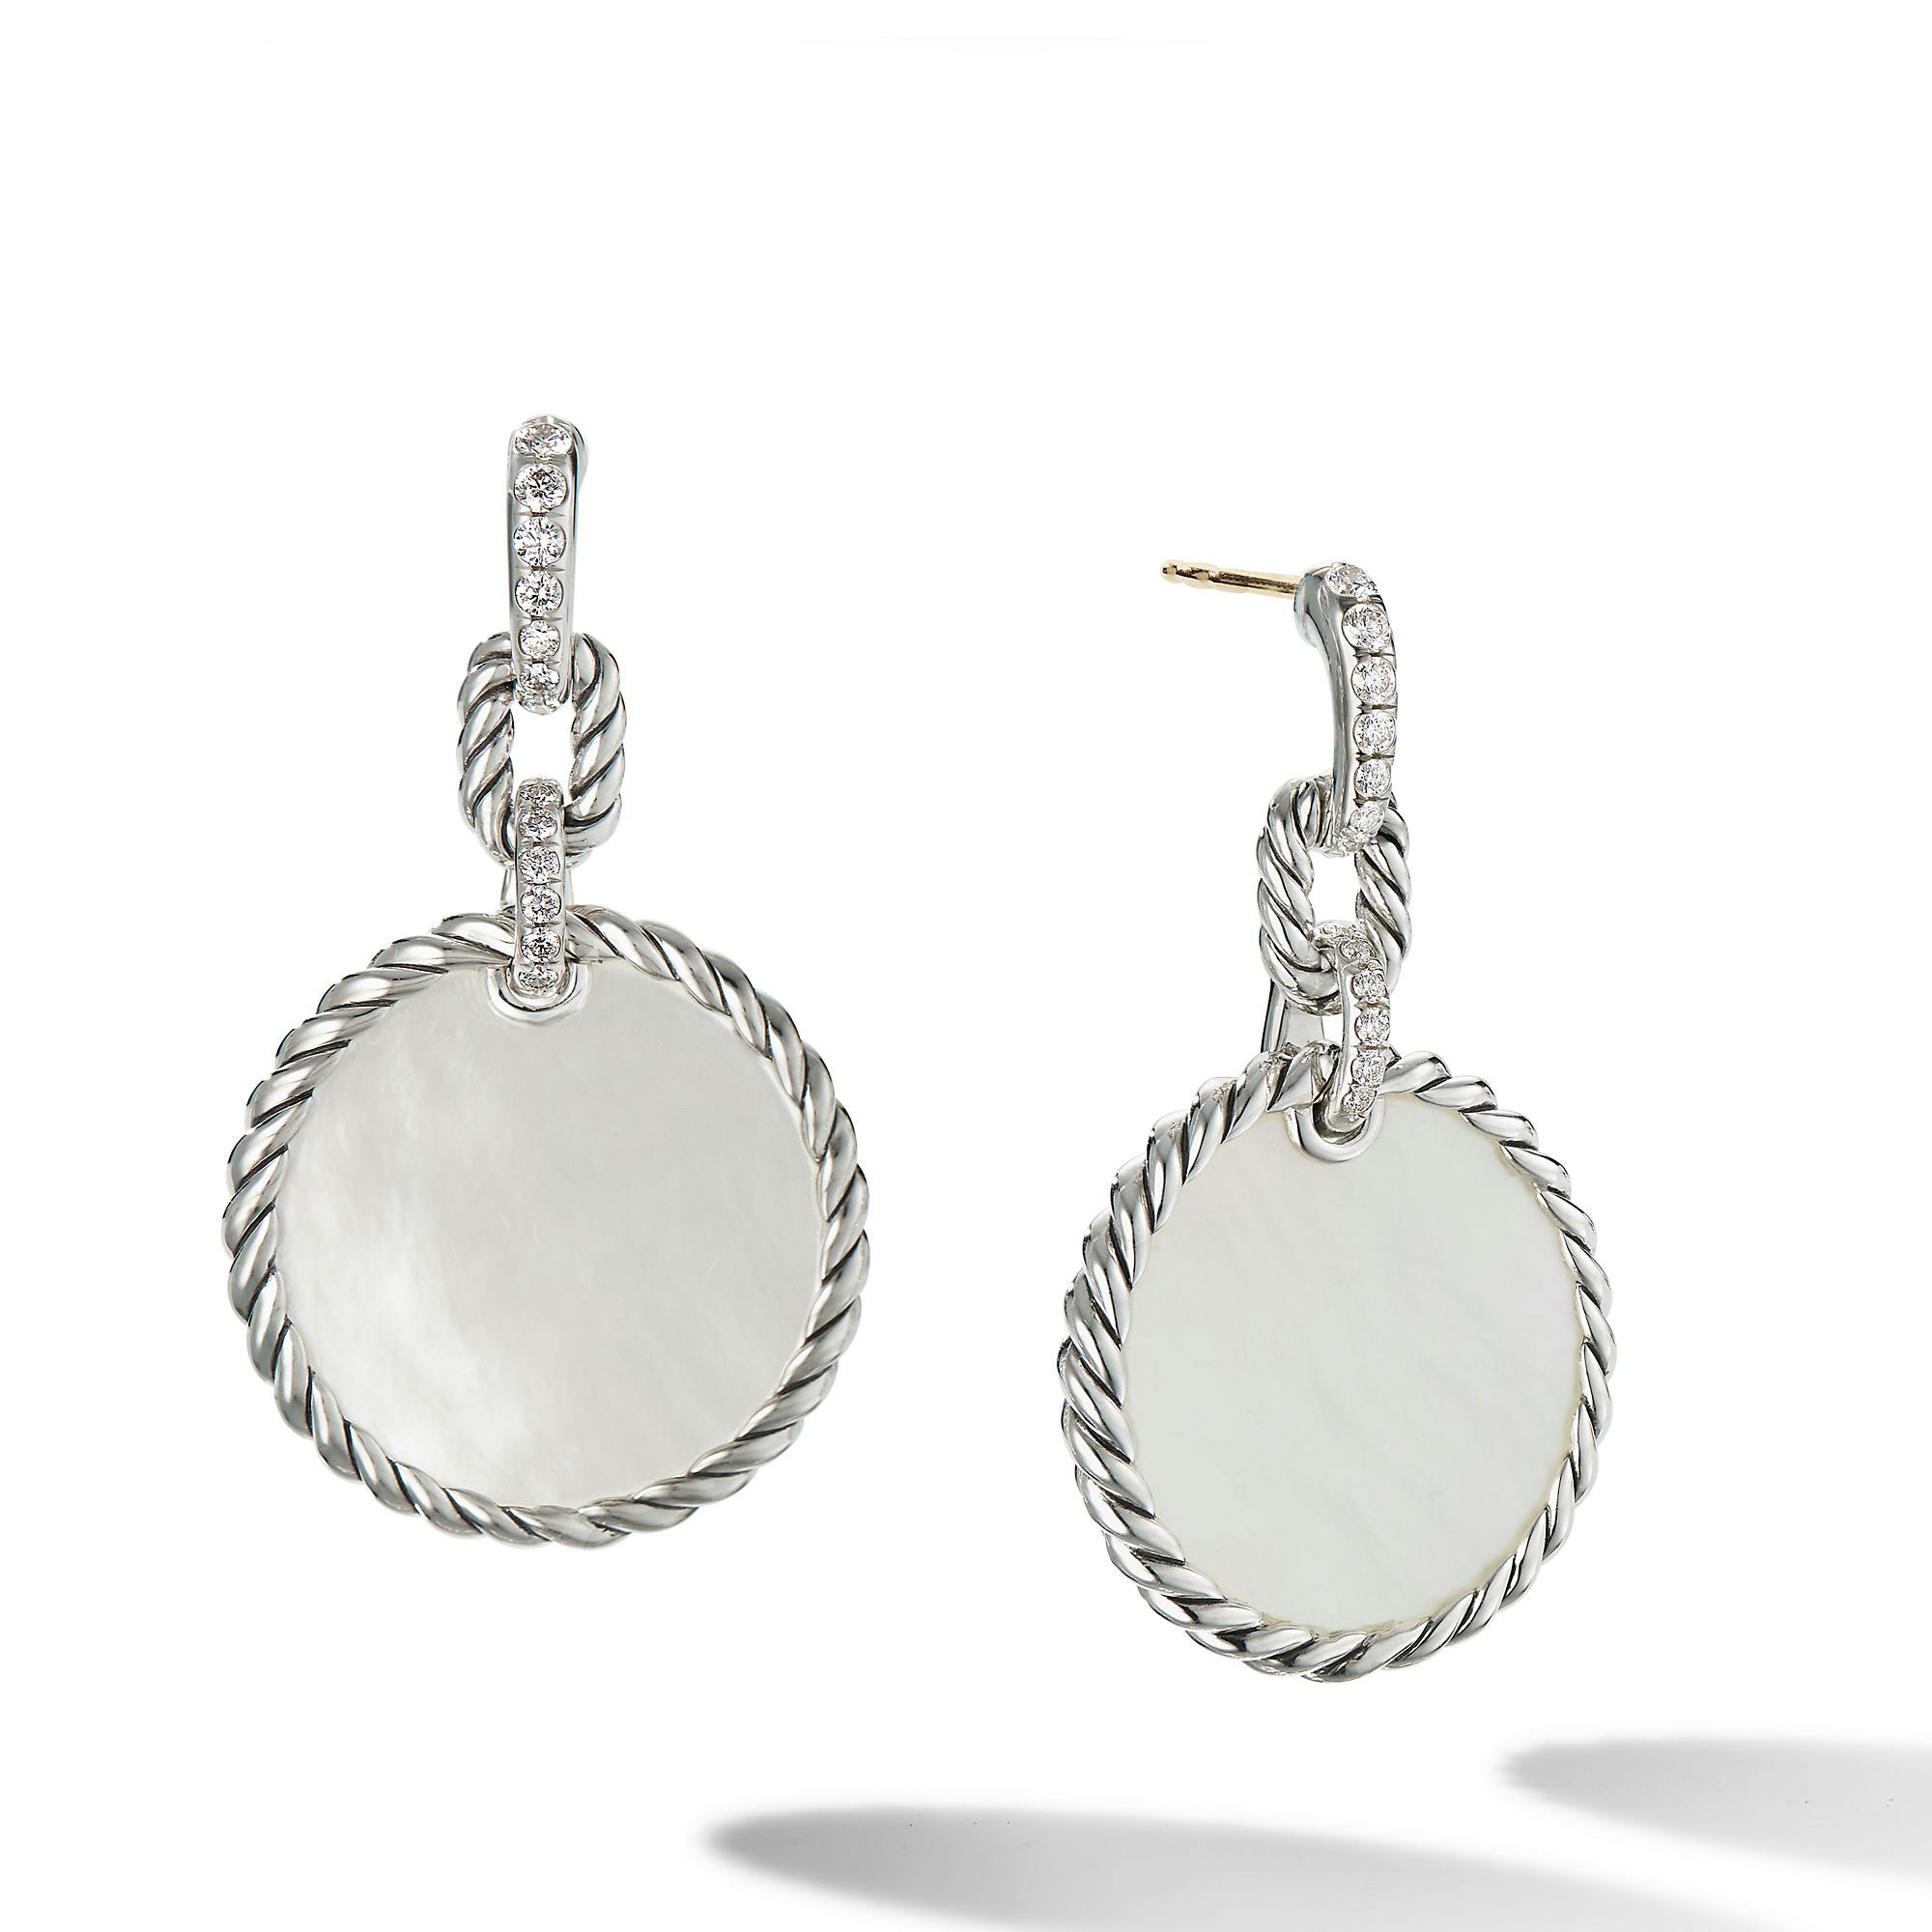 David Yurman DY Elements Drop Earrings with Mother of Pearl and Pave Diamonds